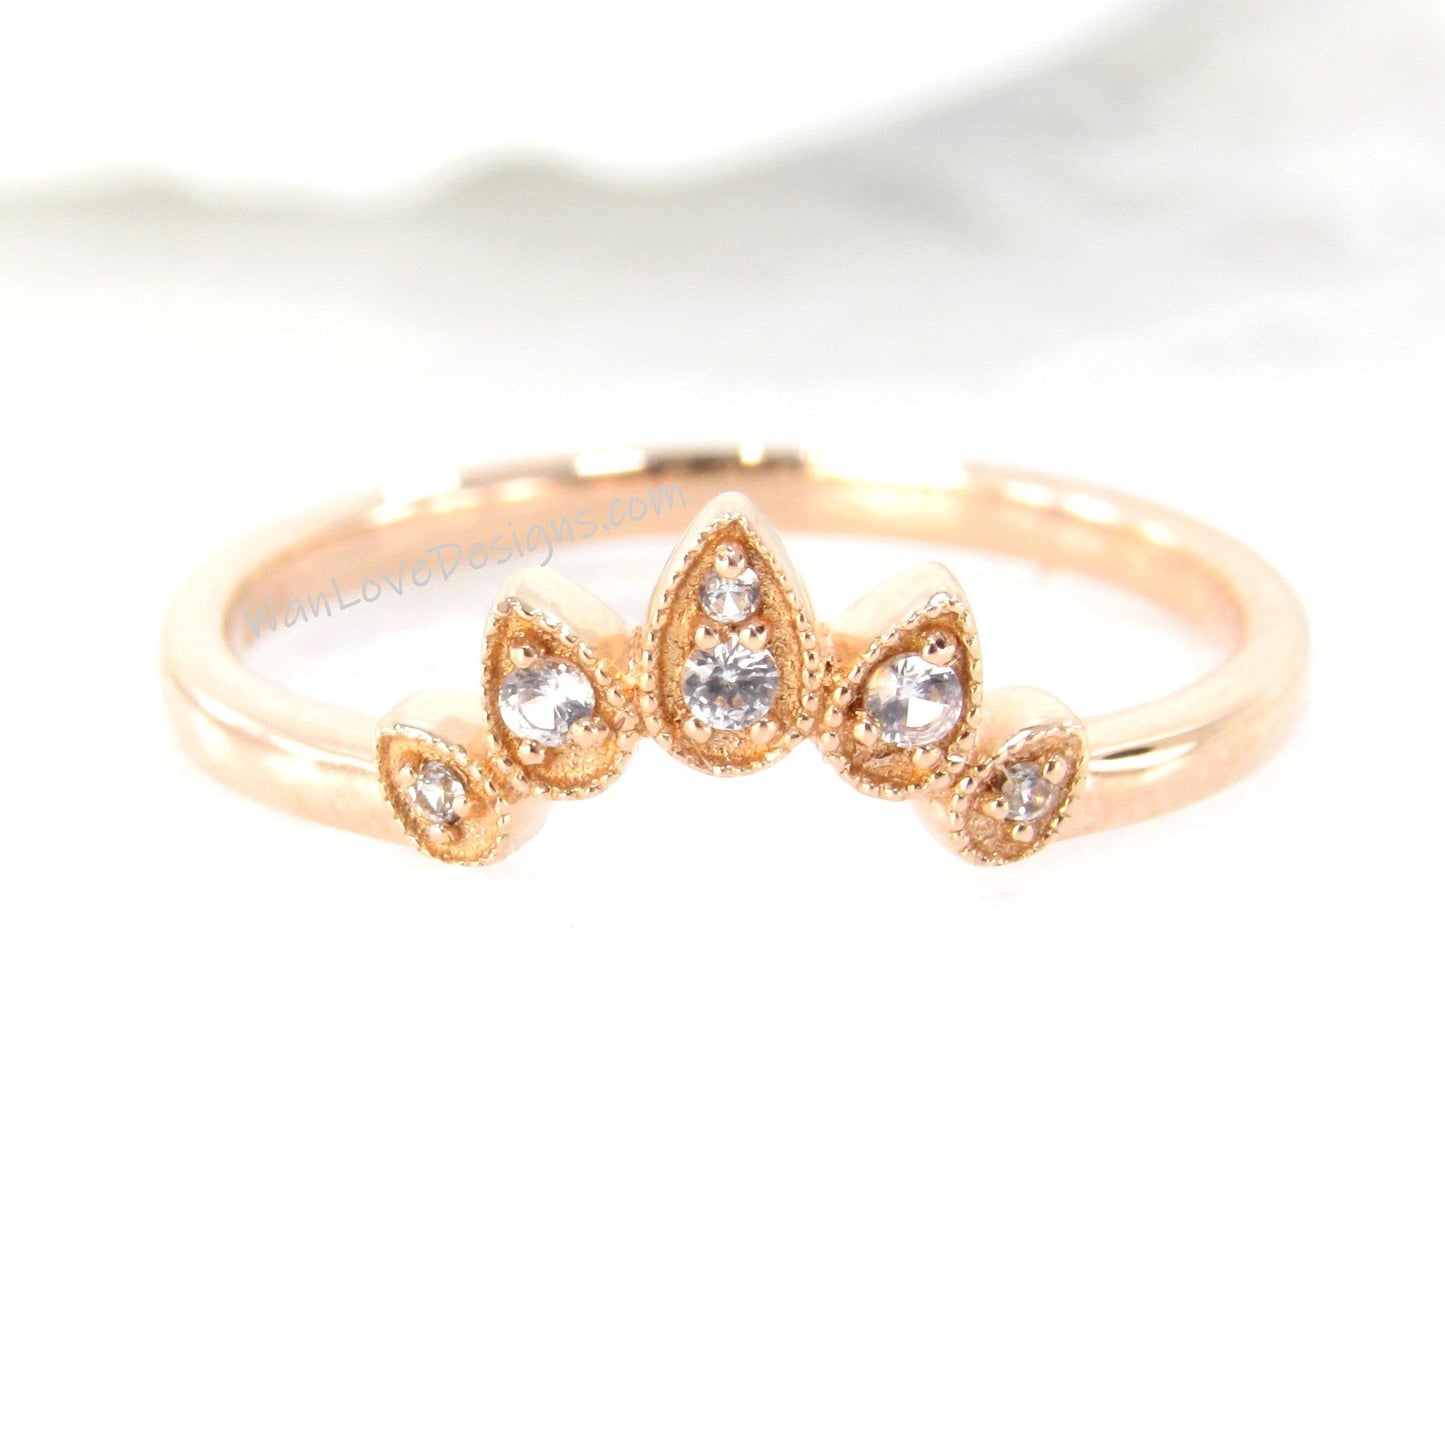 Rose Gold White Sapphire Wedding Band Women vintage curved wedding ring bridal band leaf pear milgrain ring anniversary band-Ready to Ship Wan Love Designs